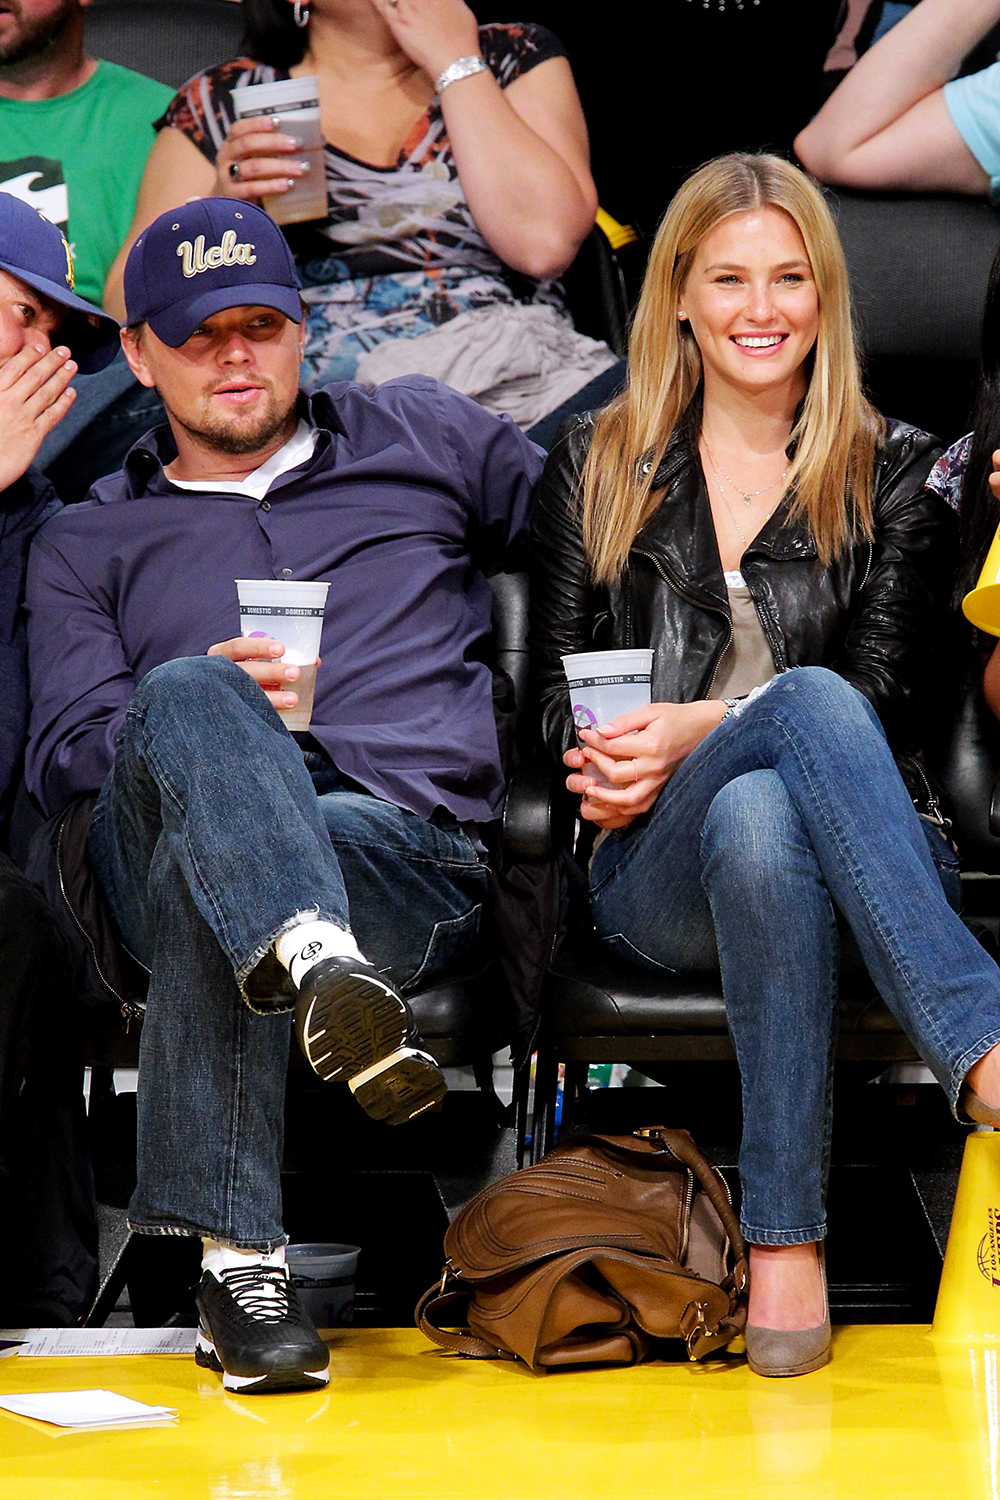 Leo's second longest relationship was with model Bar Refaeli. The couple dated from 2005 on and off until finally separating in 2011. Leo is now dating model Nina Agdal.